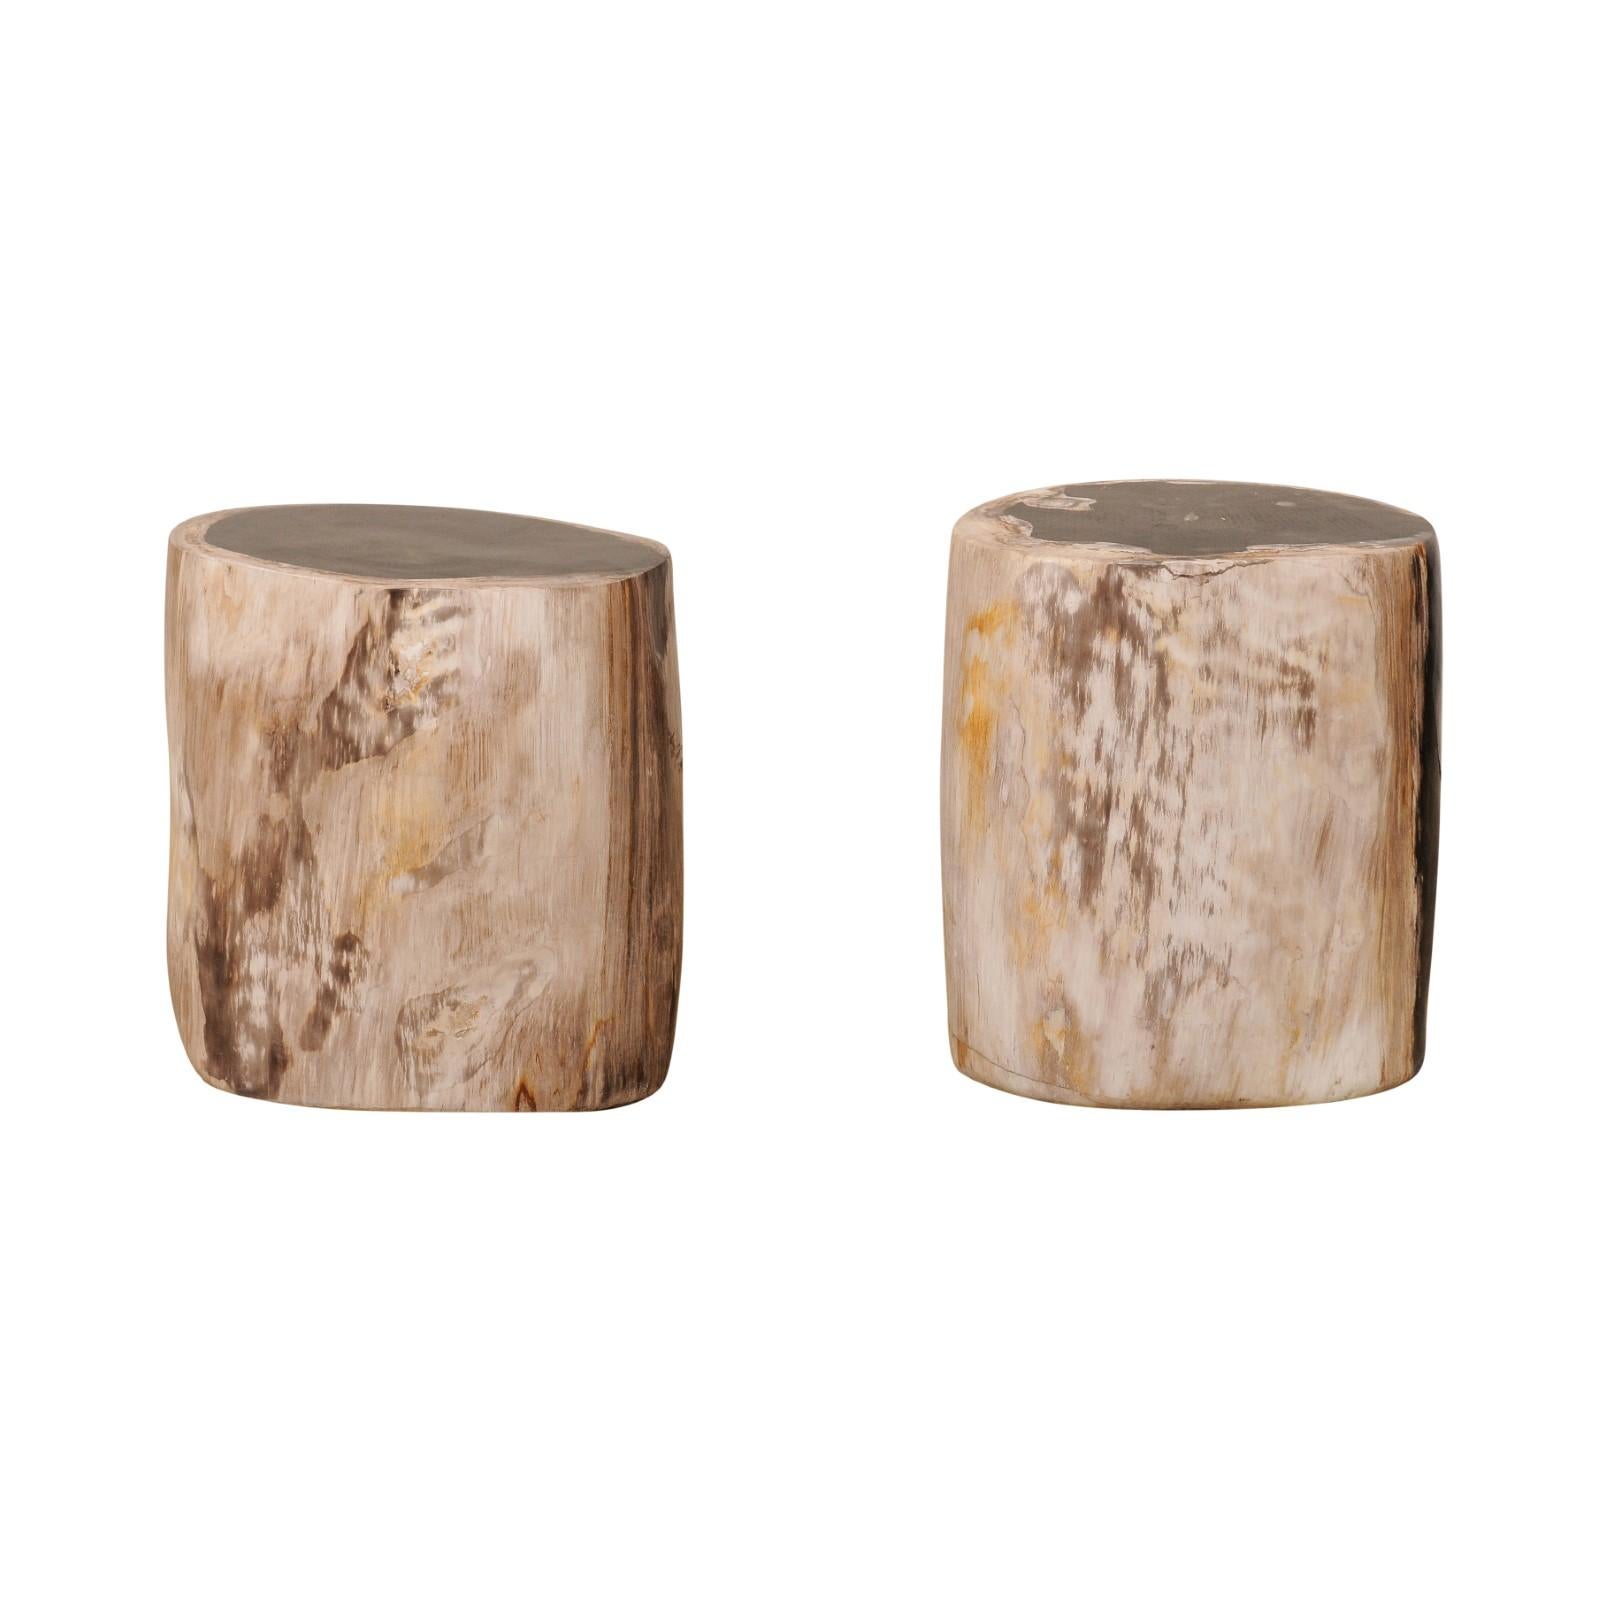 Pair of Black, Cream and Tan Petrified Wood Side Tables